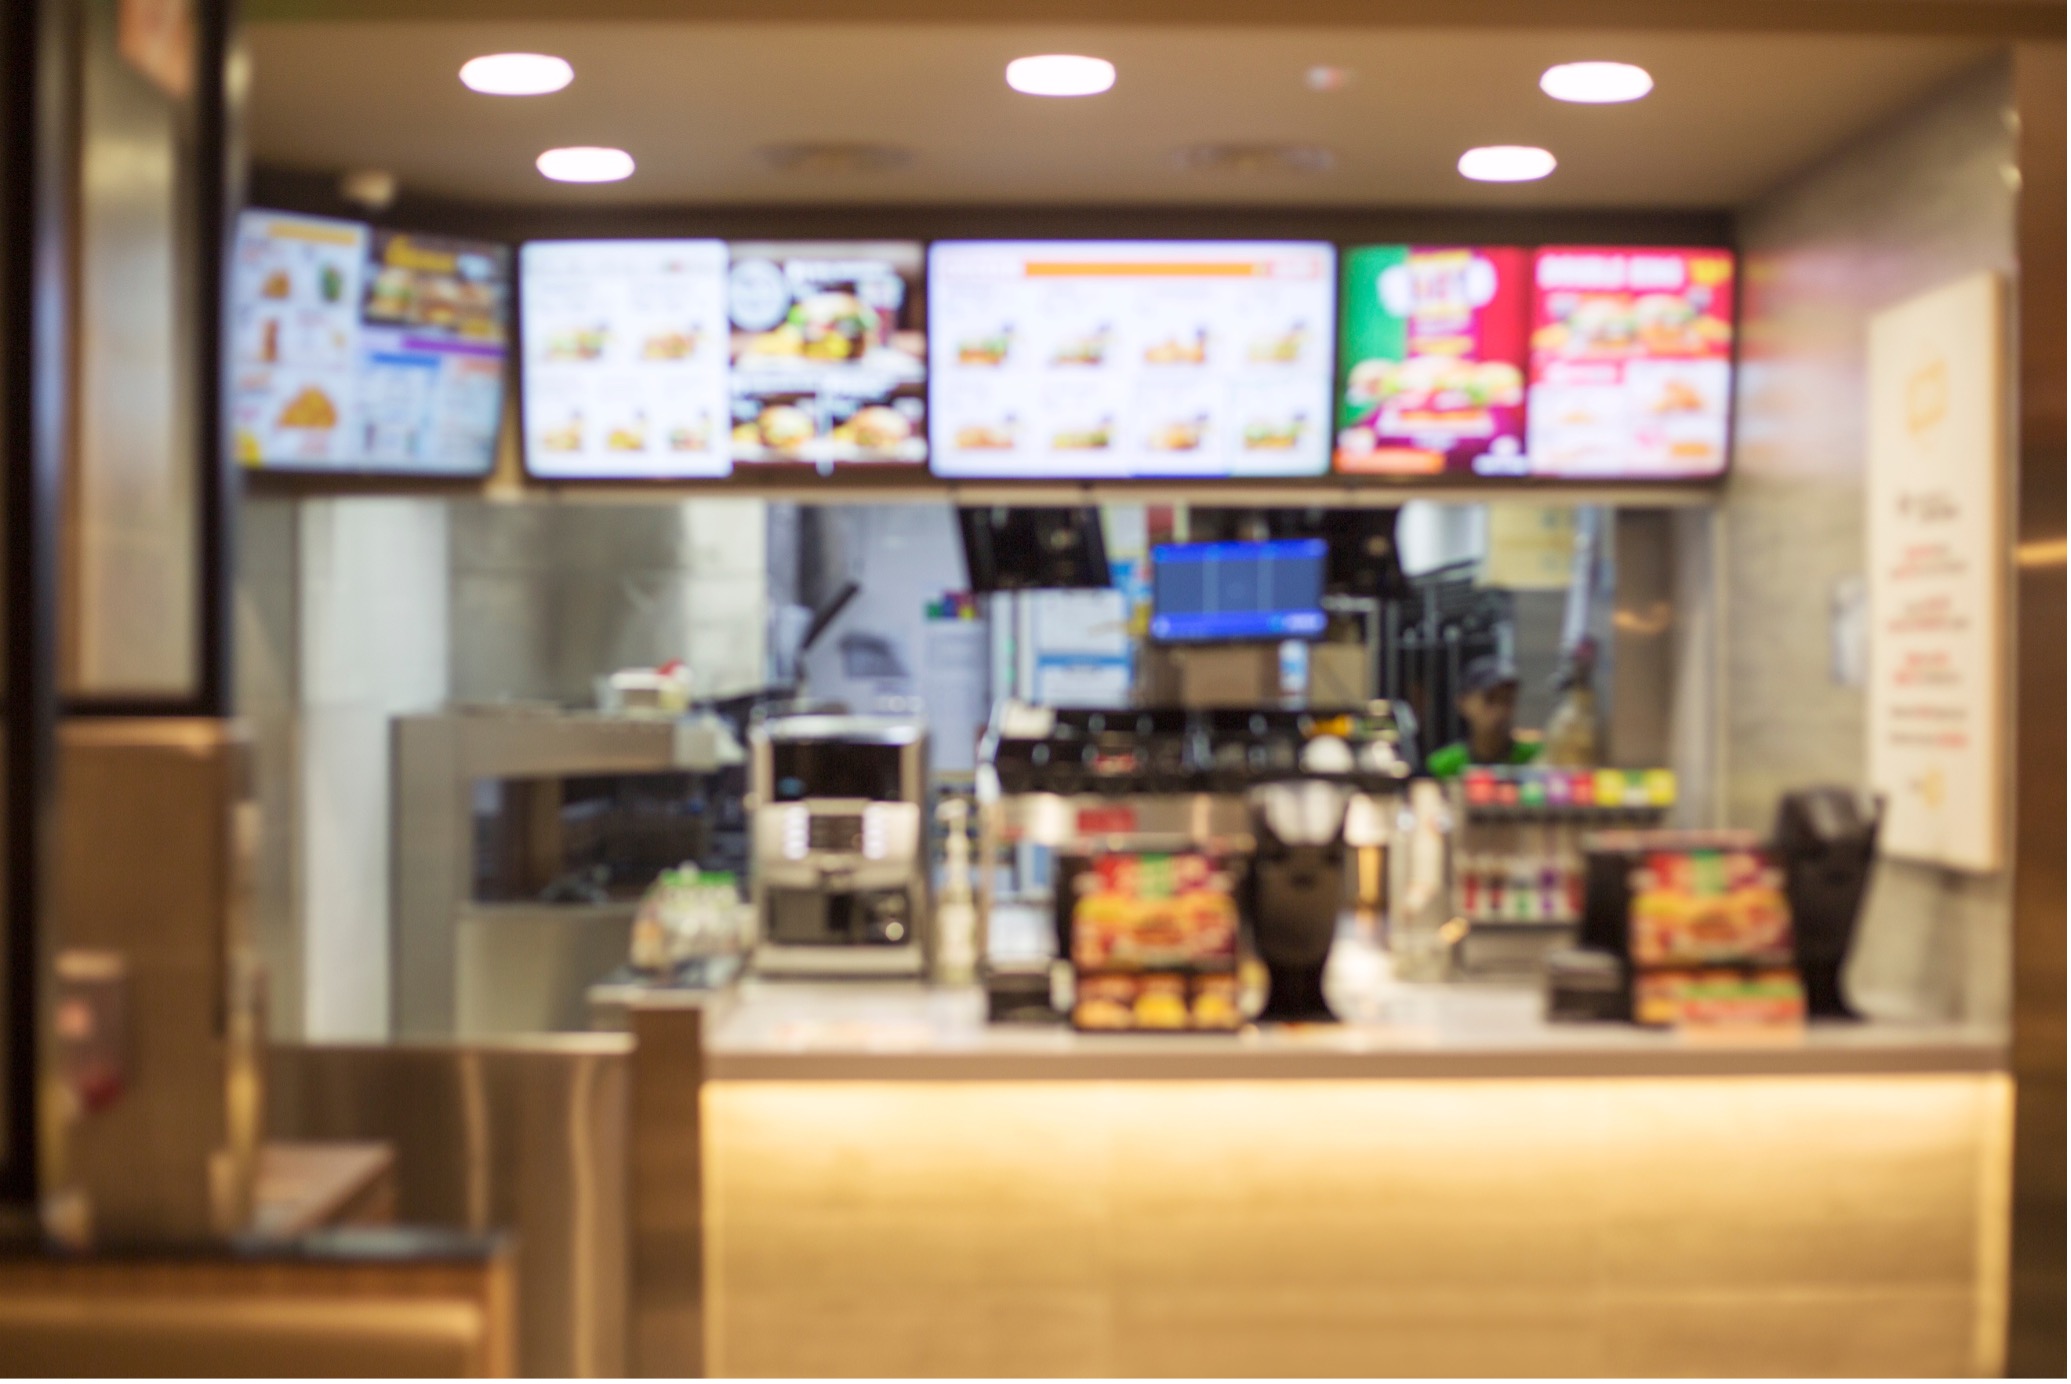 PTSG fired up for contract with fast food chain 